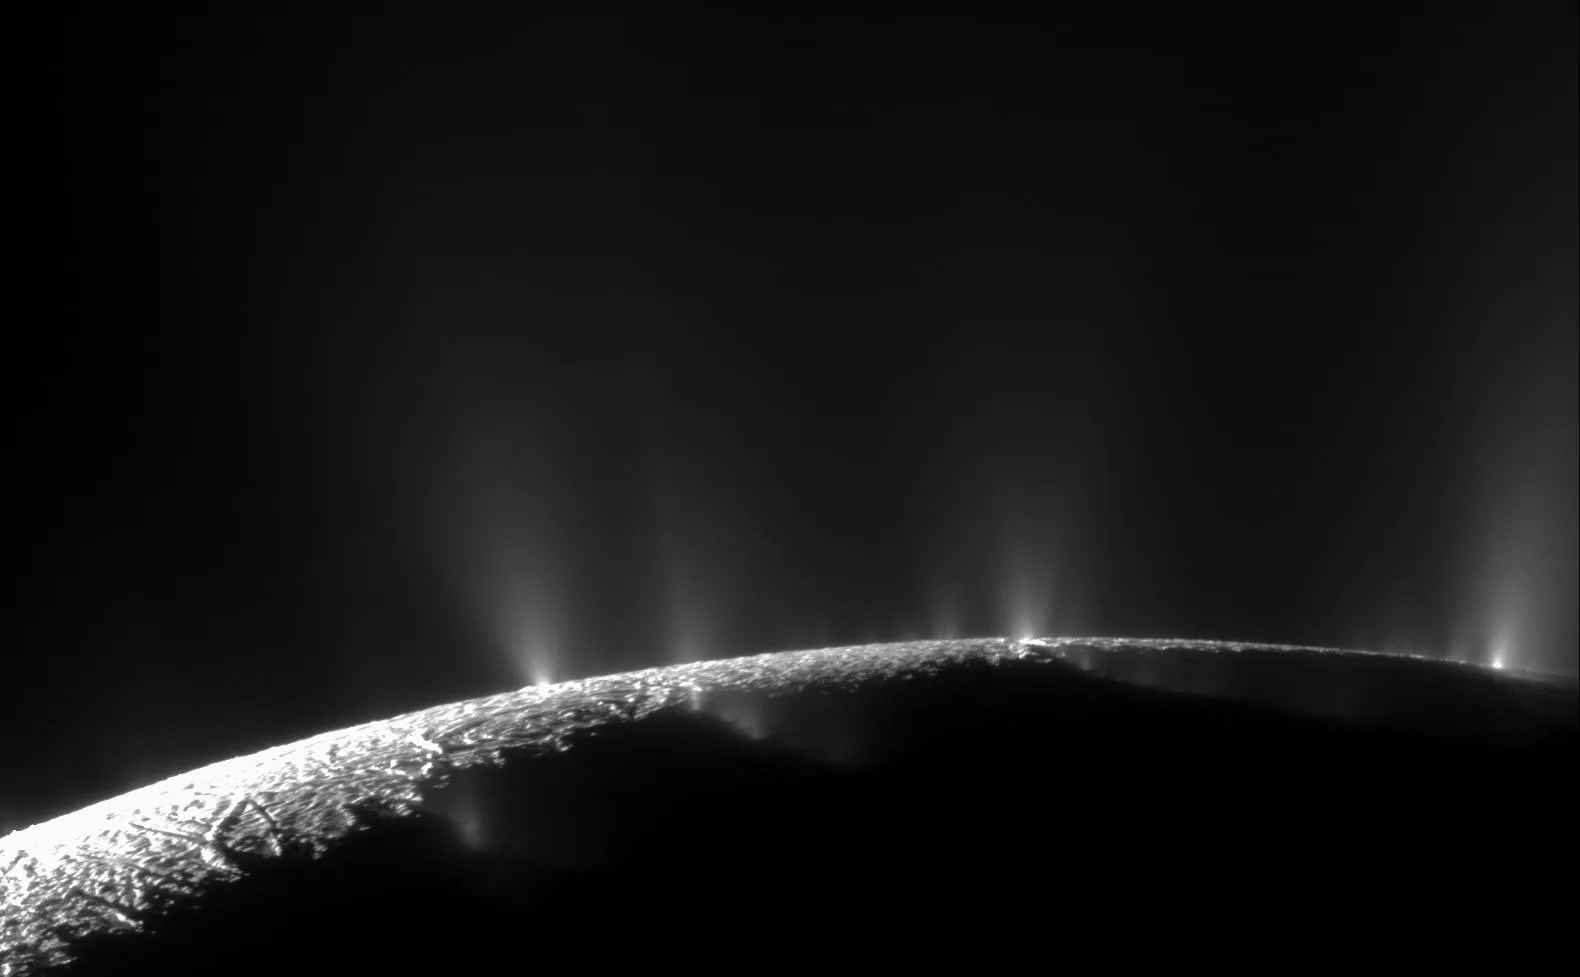 Enceladus plumes in a black and white image